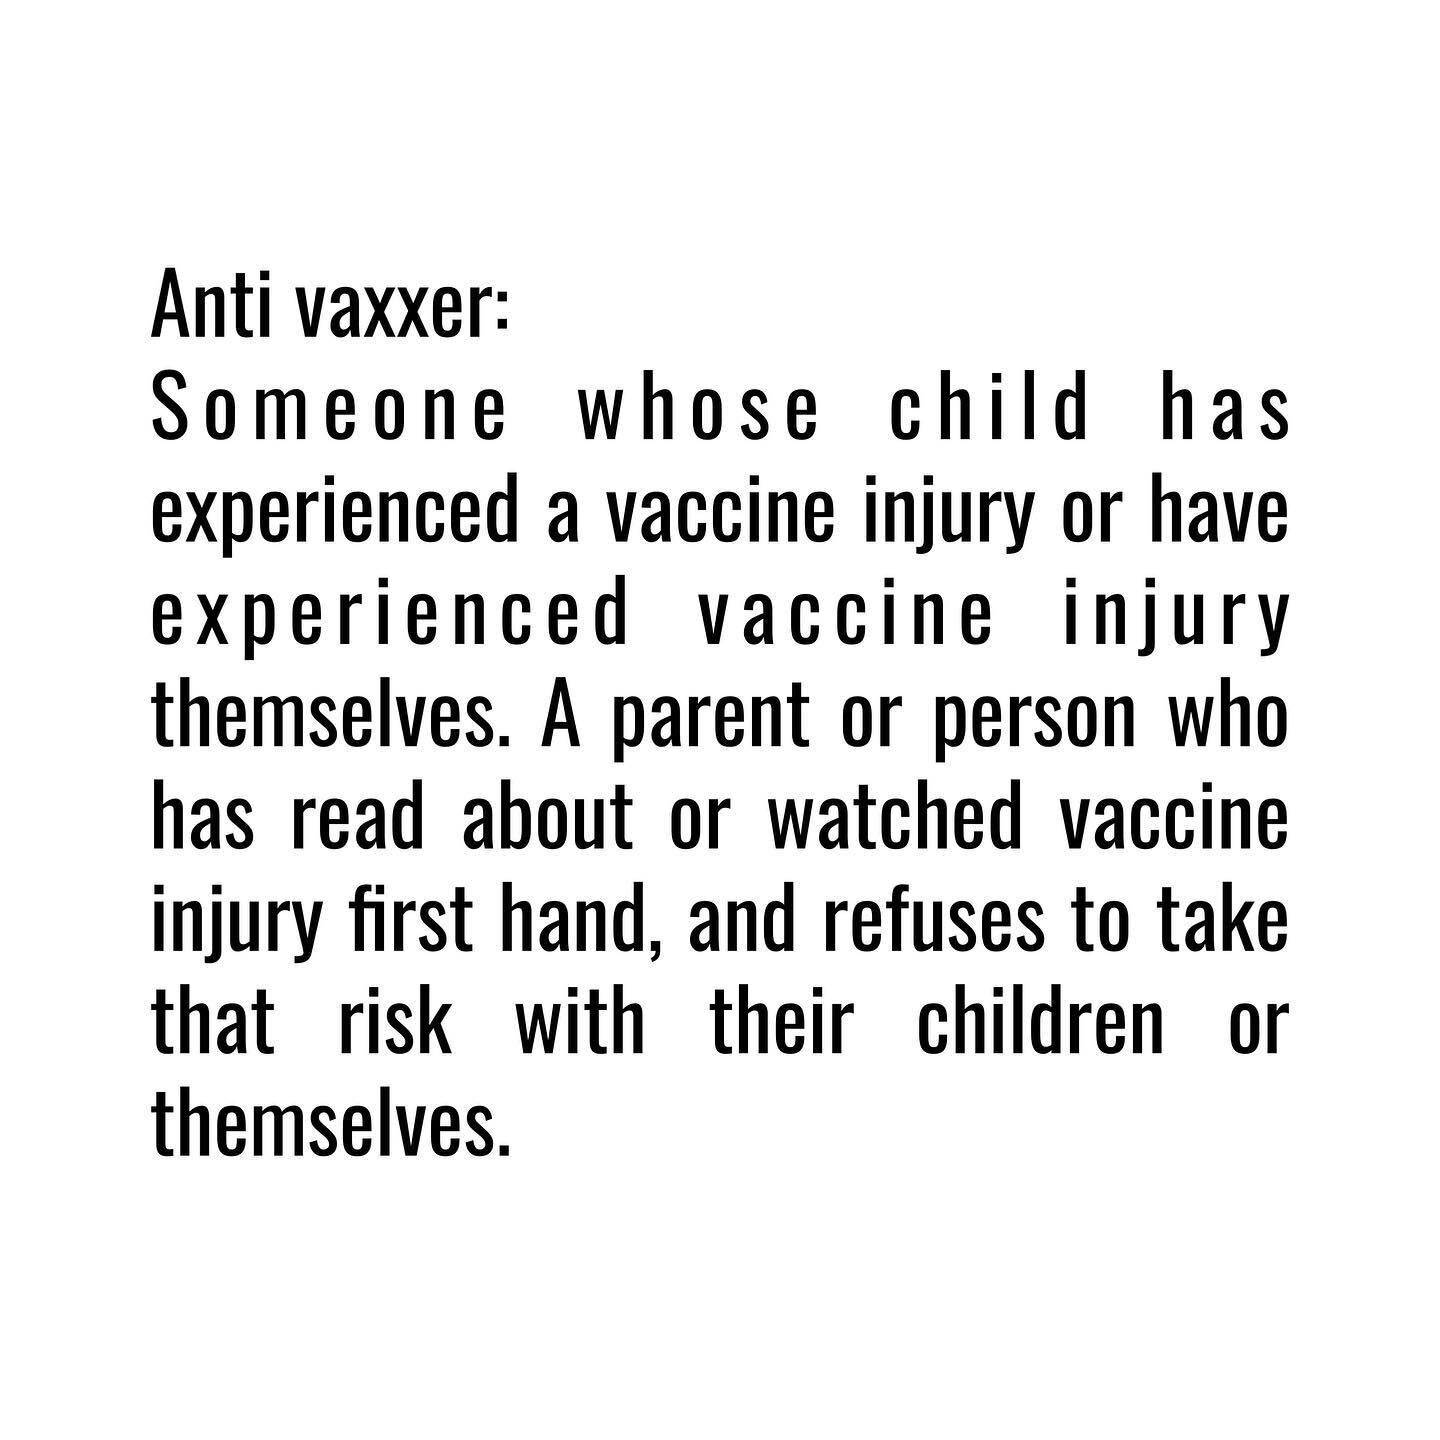 That&rsquo;s it. That&rsquo;s an anti vaxxer. So, when you start seeing campaigns against anti vaxxers and those who are vaccine hesitant just be mindful that this is their target&mdash;Injured people or parents of injured children and parents who re